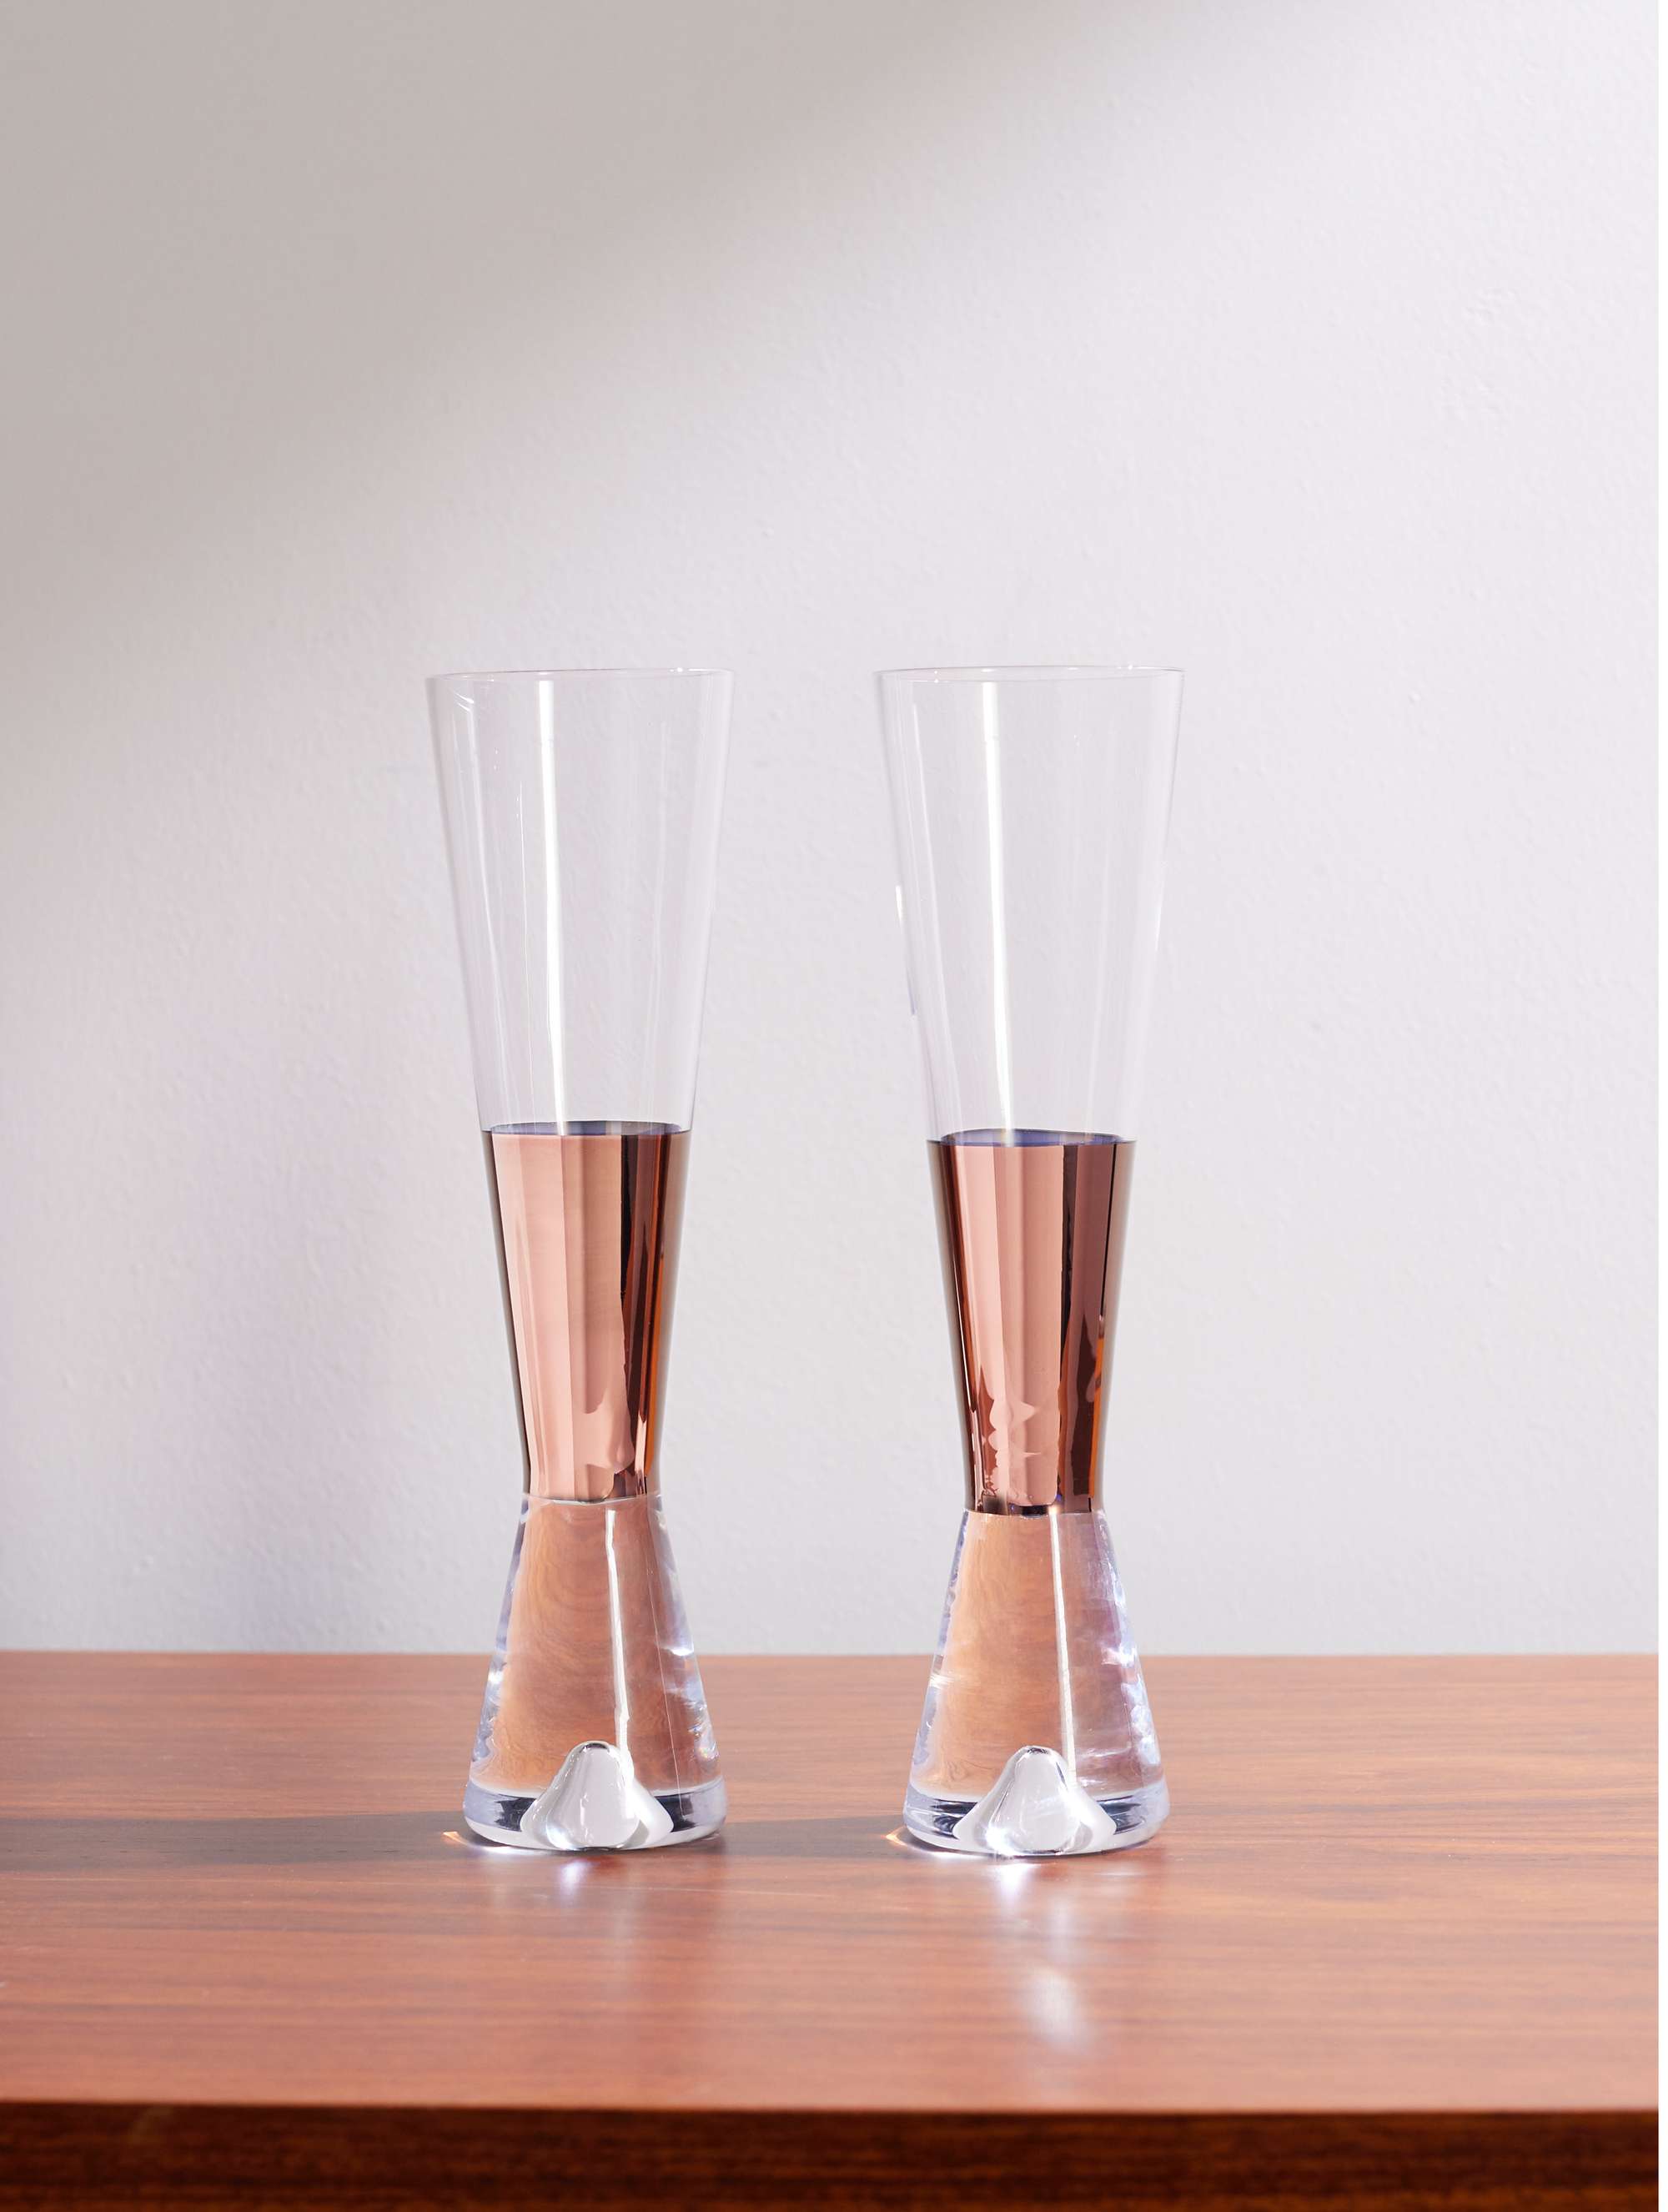 TOM DIXON Tank Set of Two Painted Champagne Glasses | MR PORTER